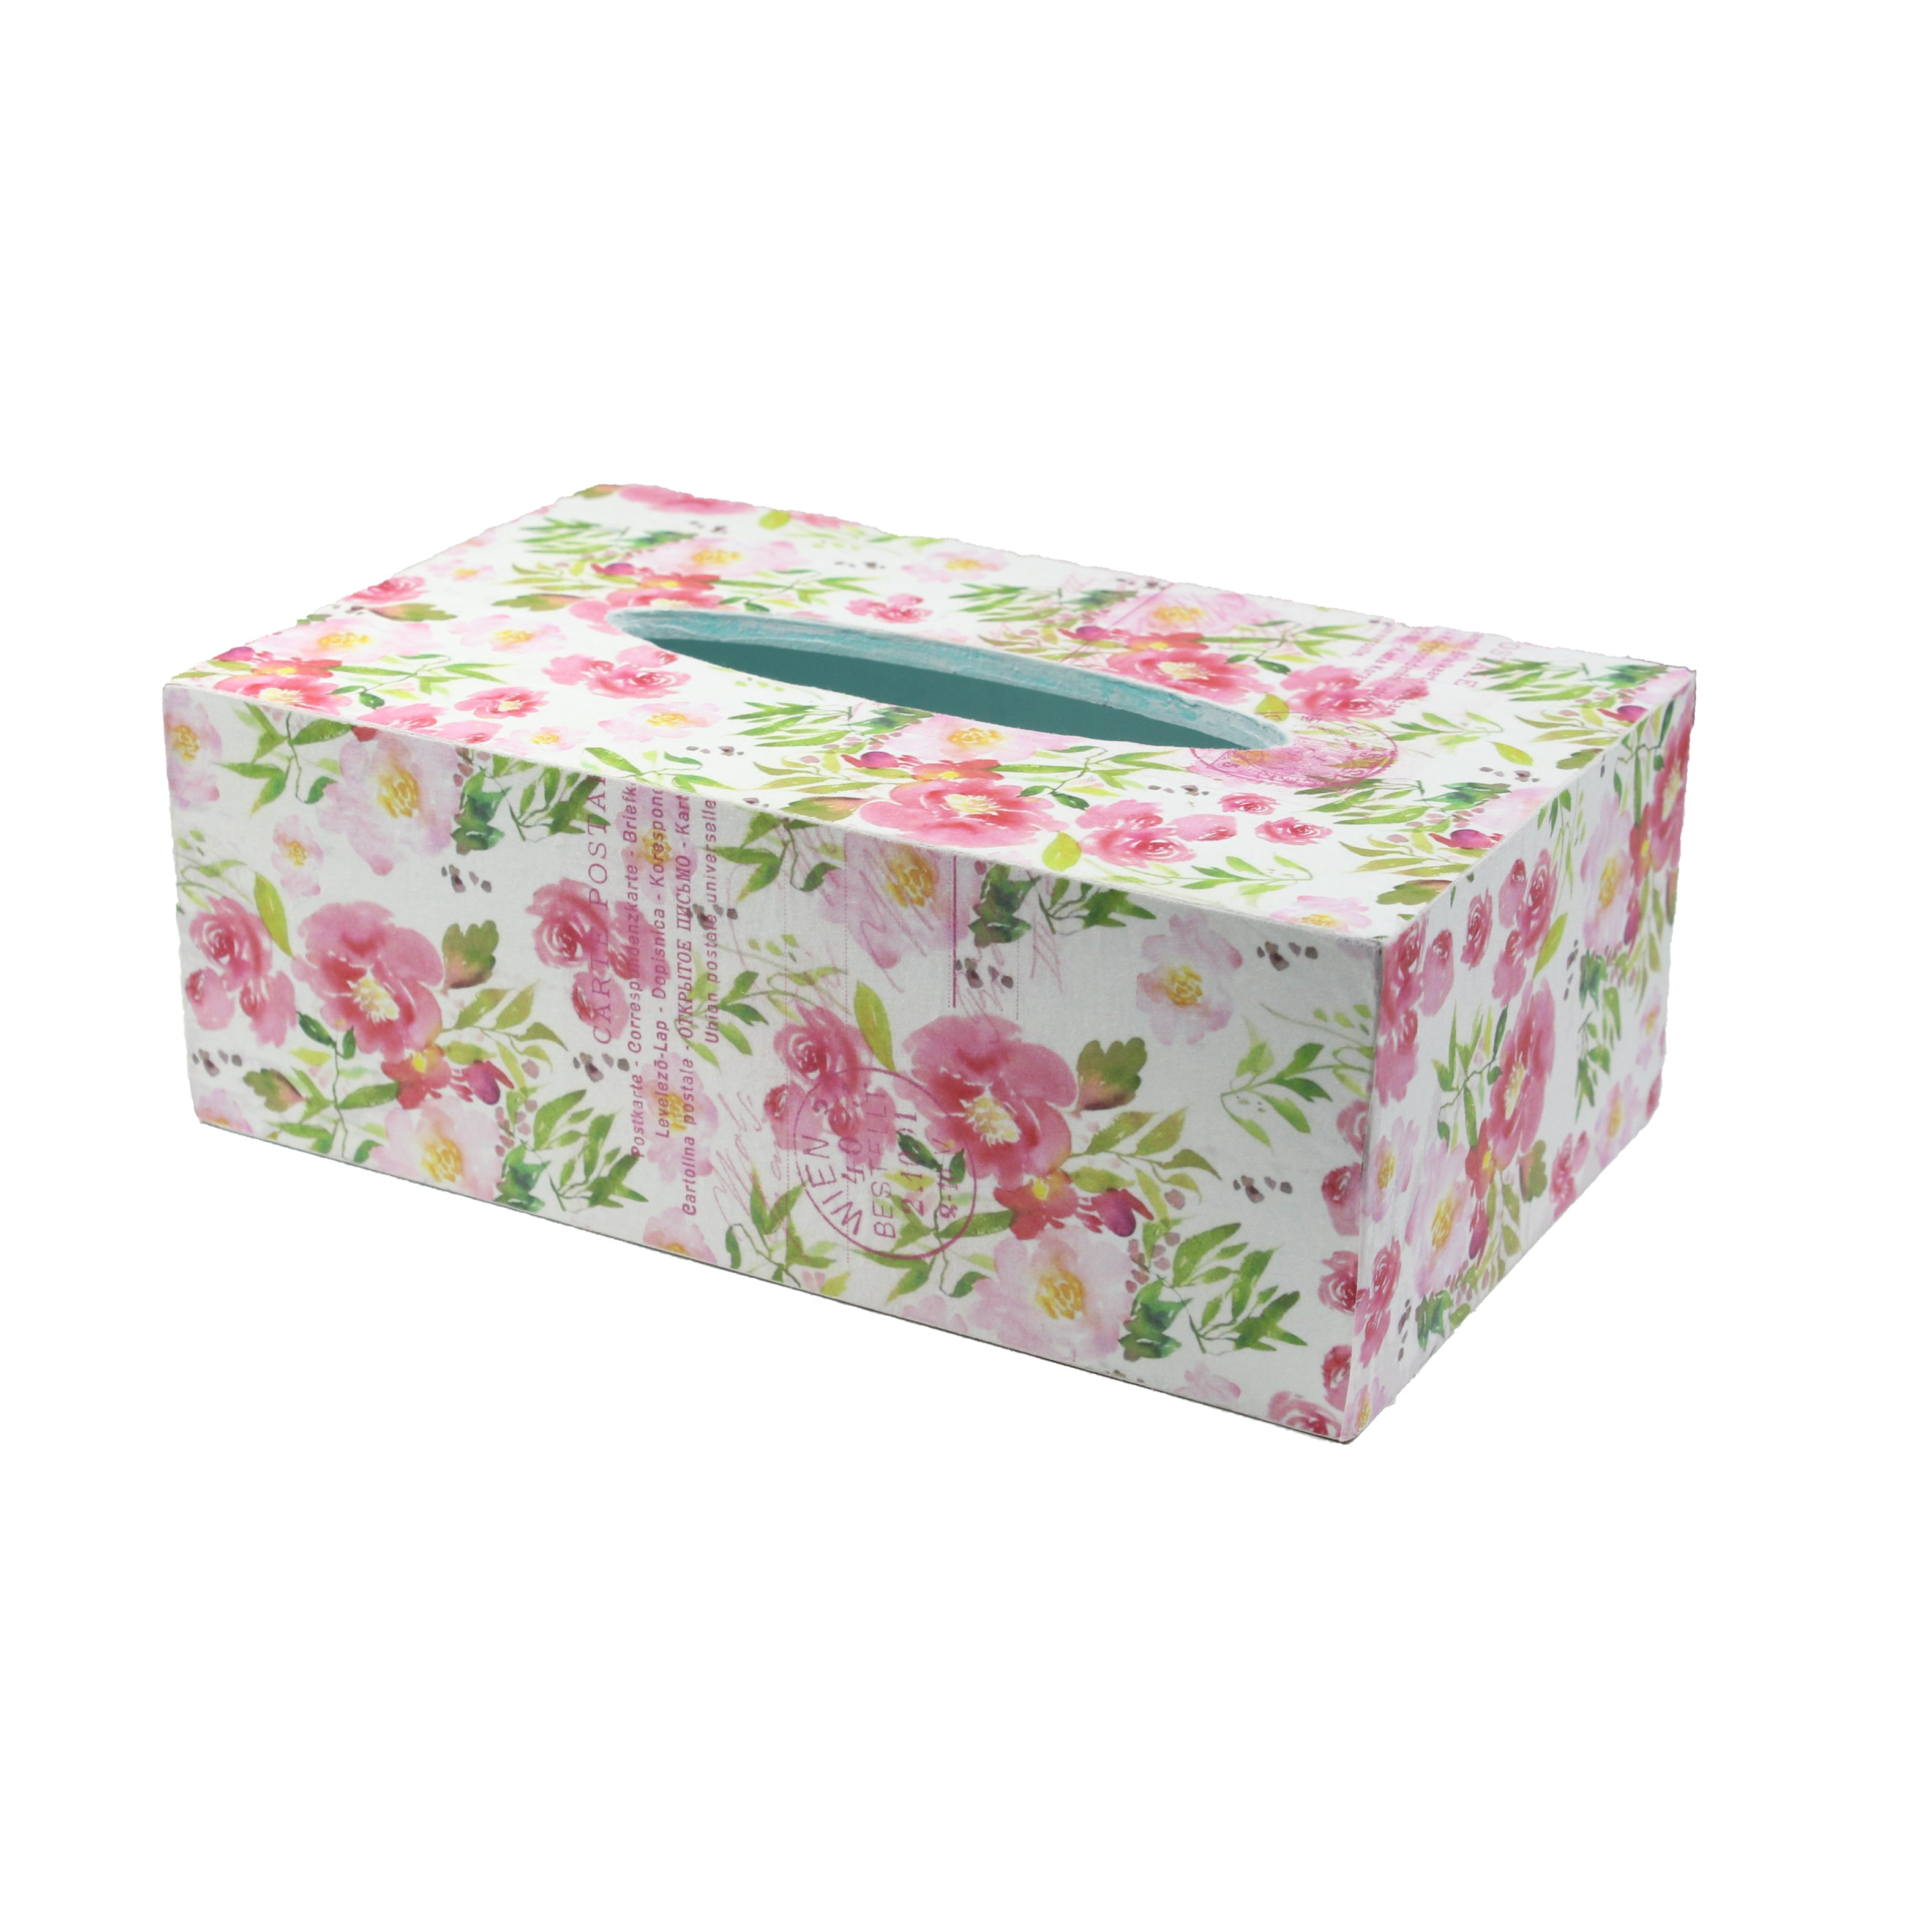 Mdf Tissue Box Designed For Origami So Soft Face Tissue 100 Pulls 9 X 3.25 X 5.5Inch 5.5Mm Thick 1Pc